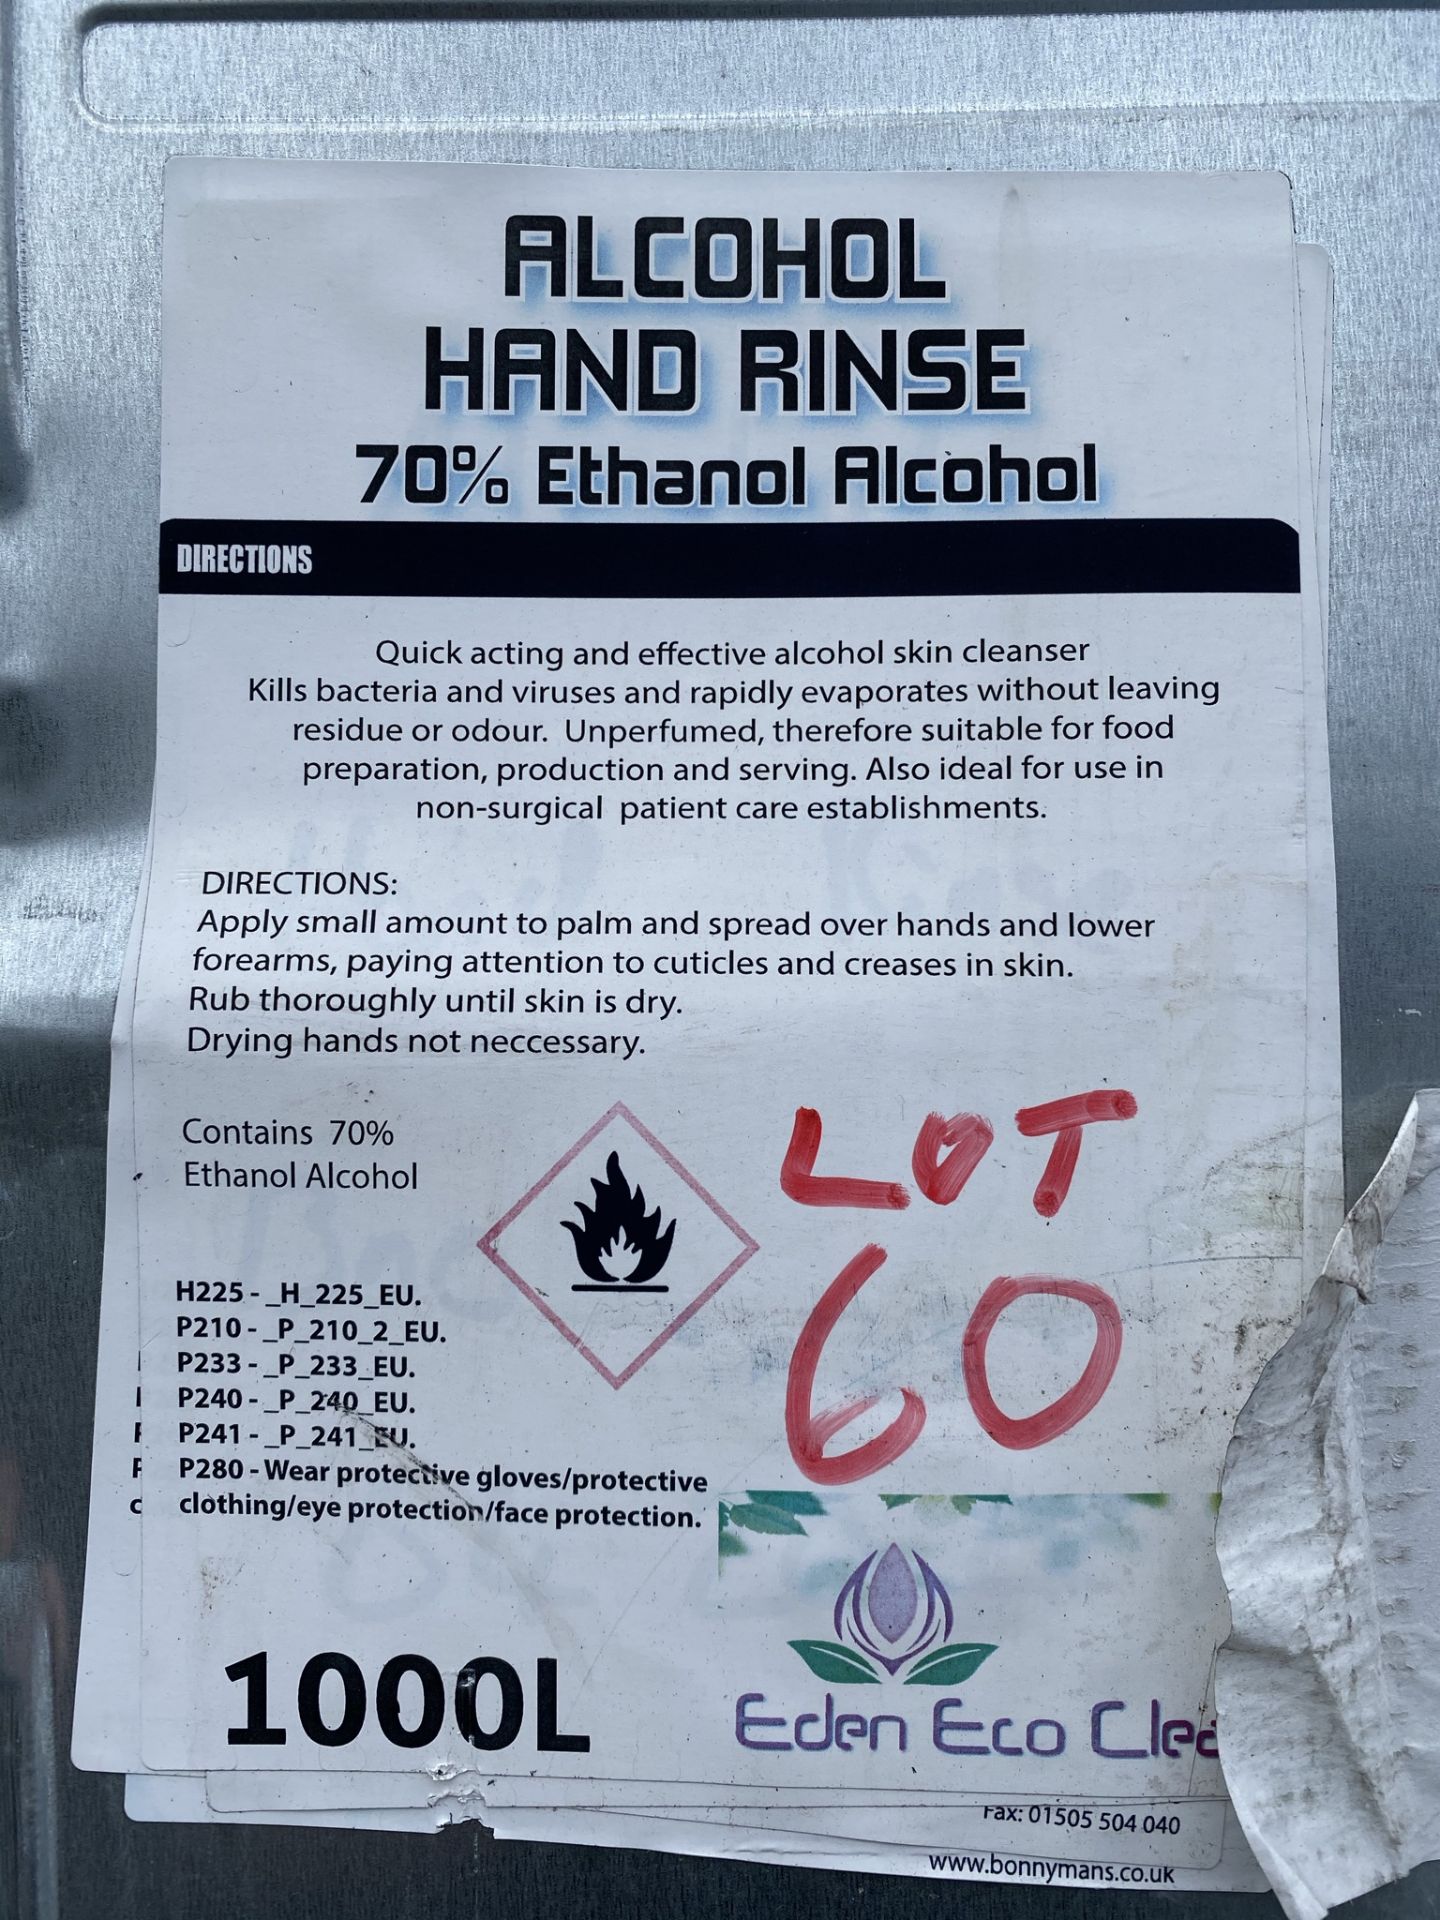 Contents to 1000ltr IBC - Alcohol Hand Rinse - 70% Ethanol Alcohol as per label - Image 2 of 2